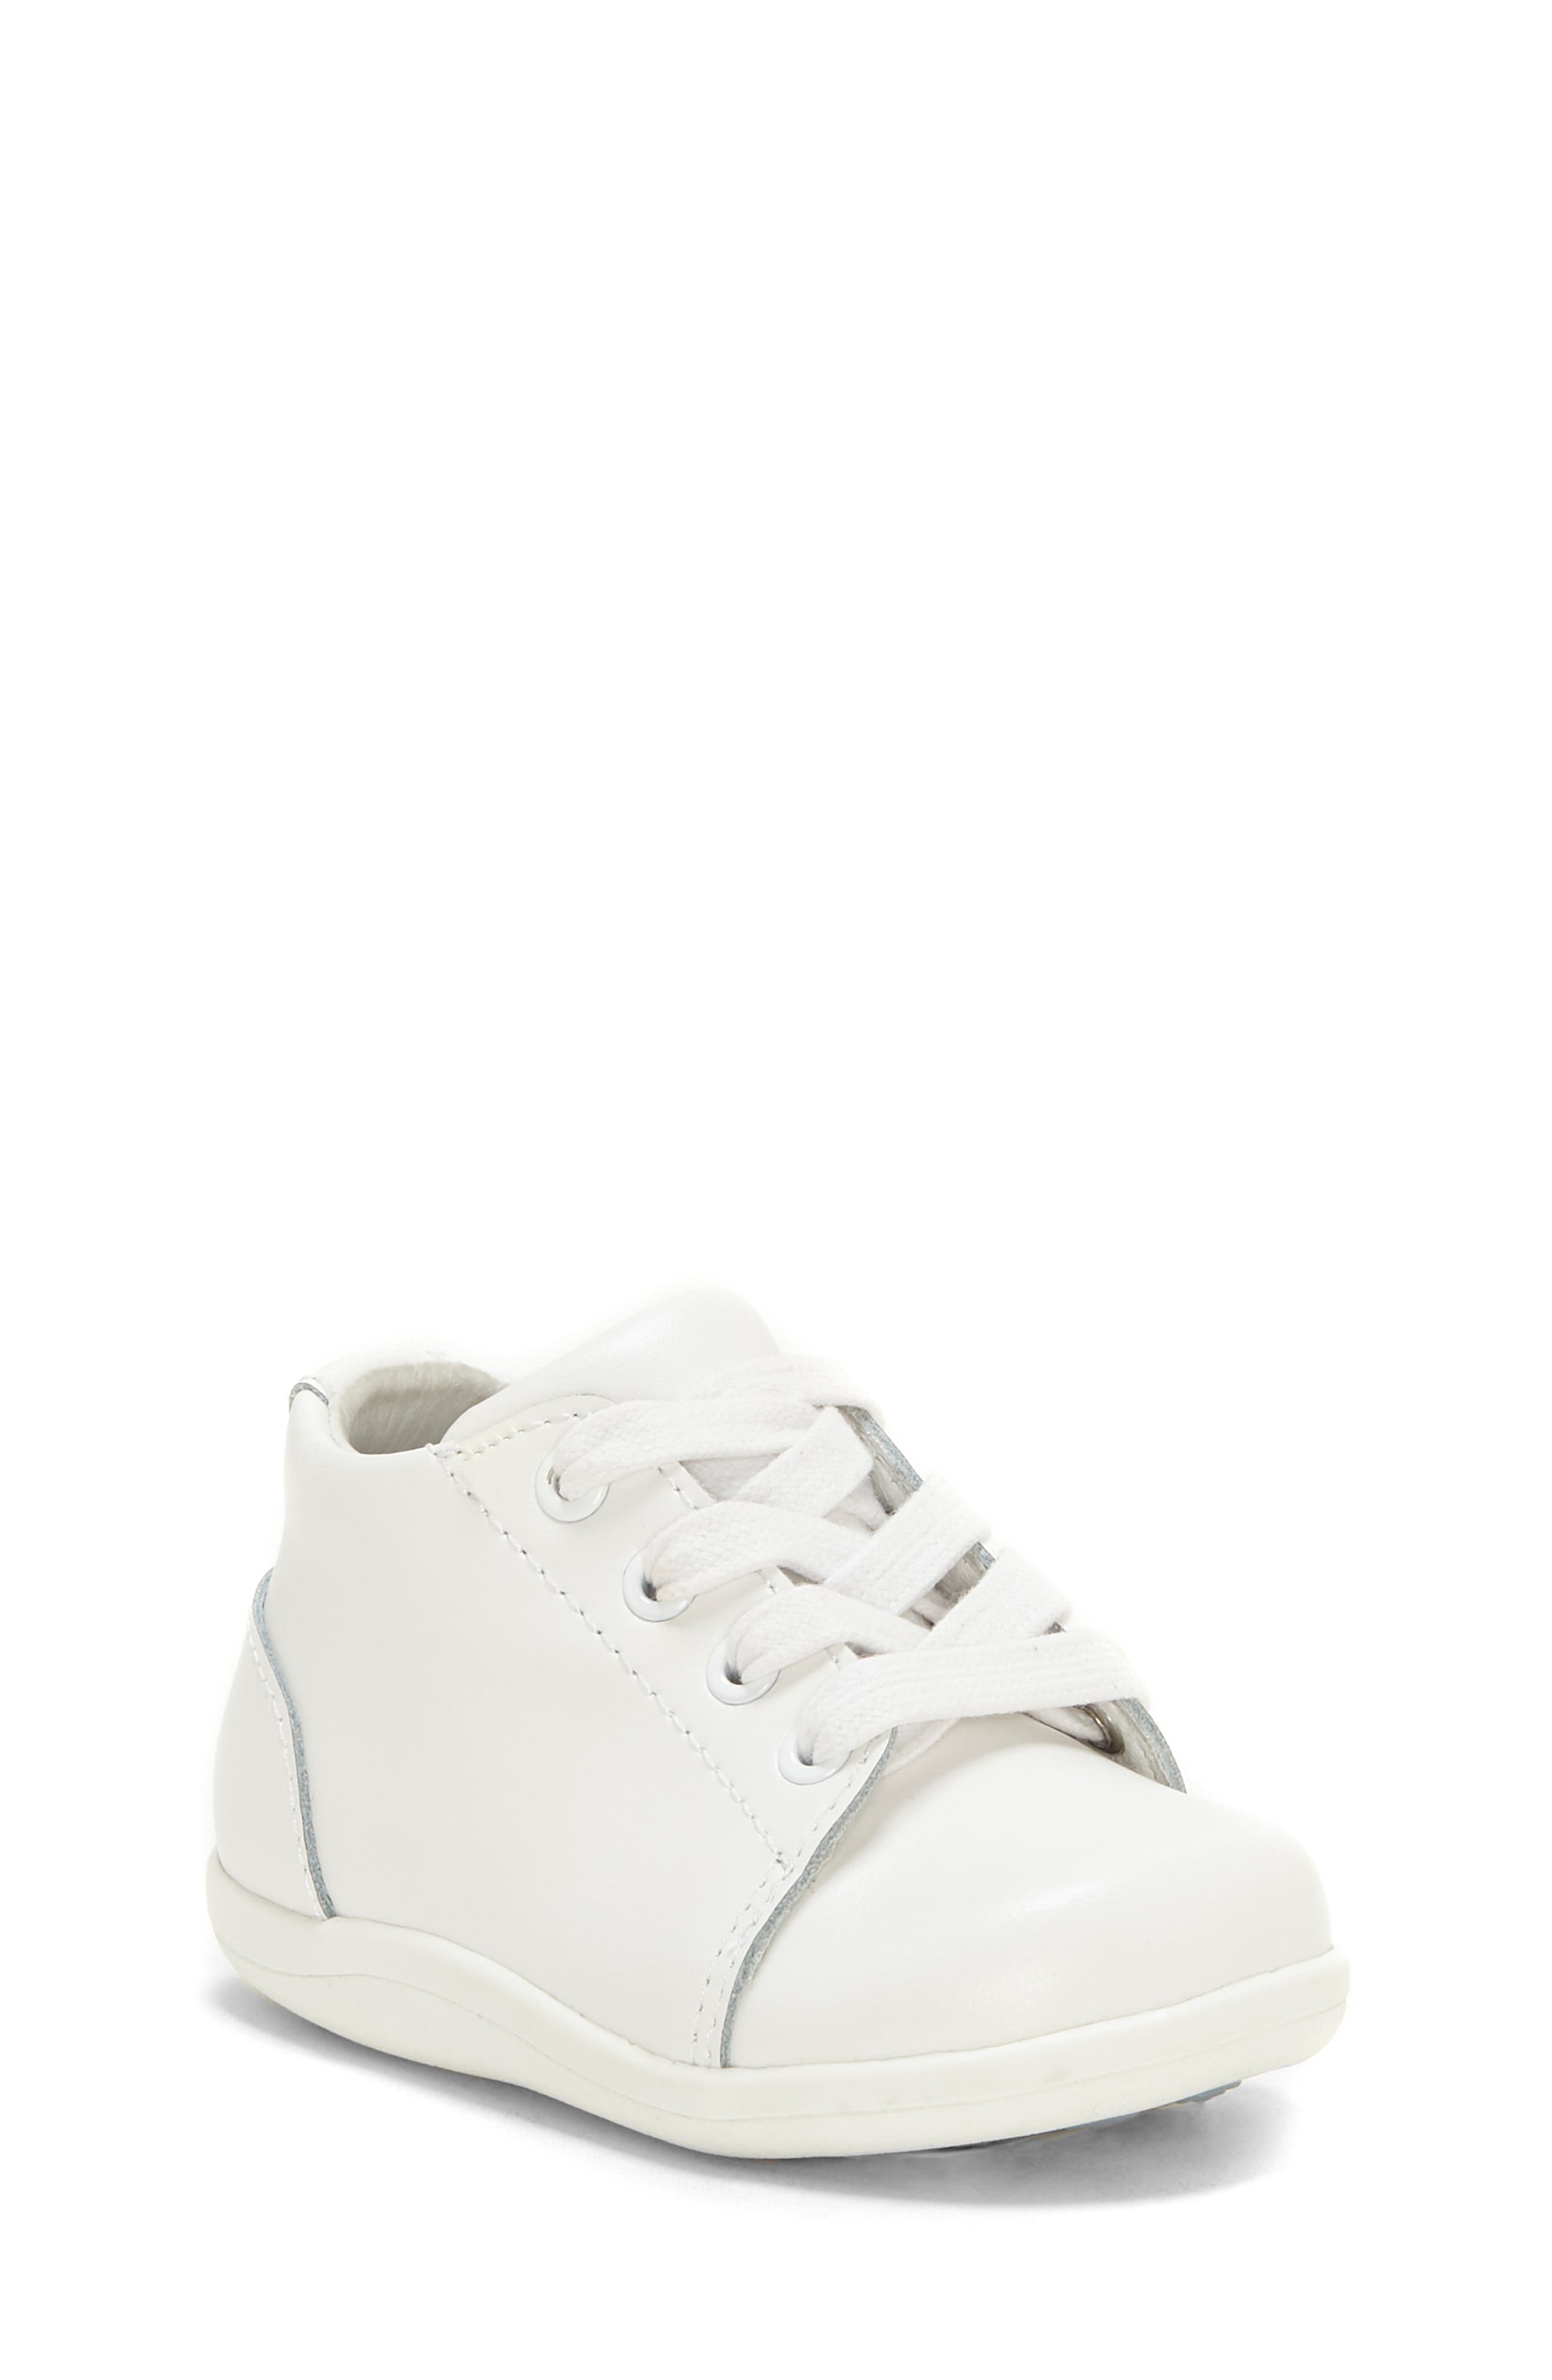 sole play shoes white